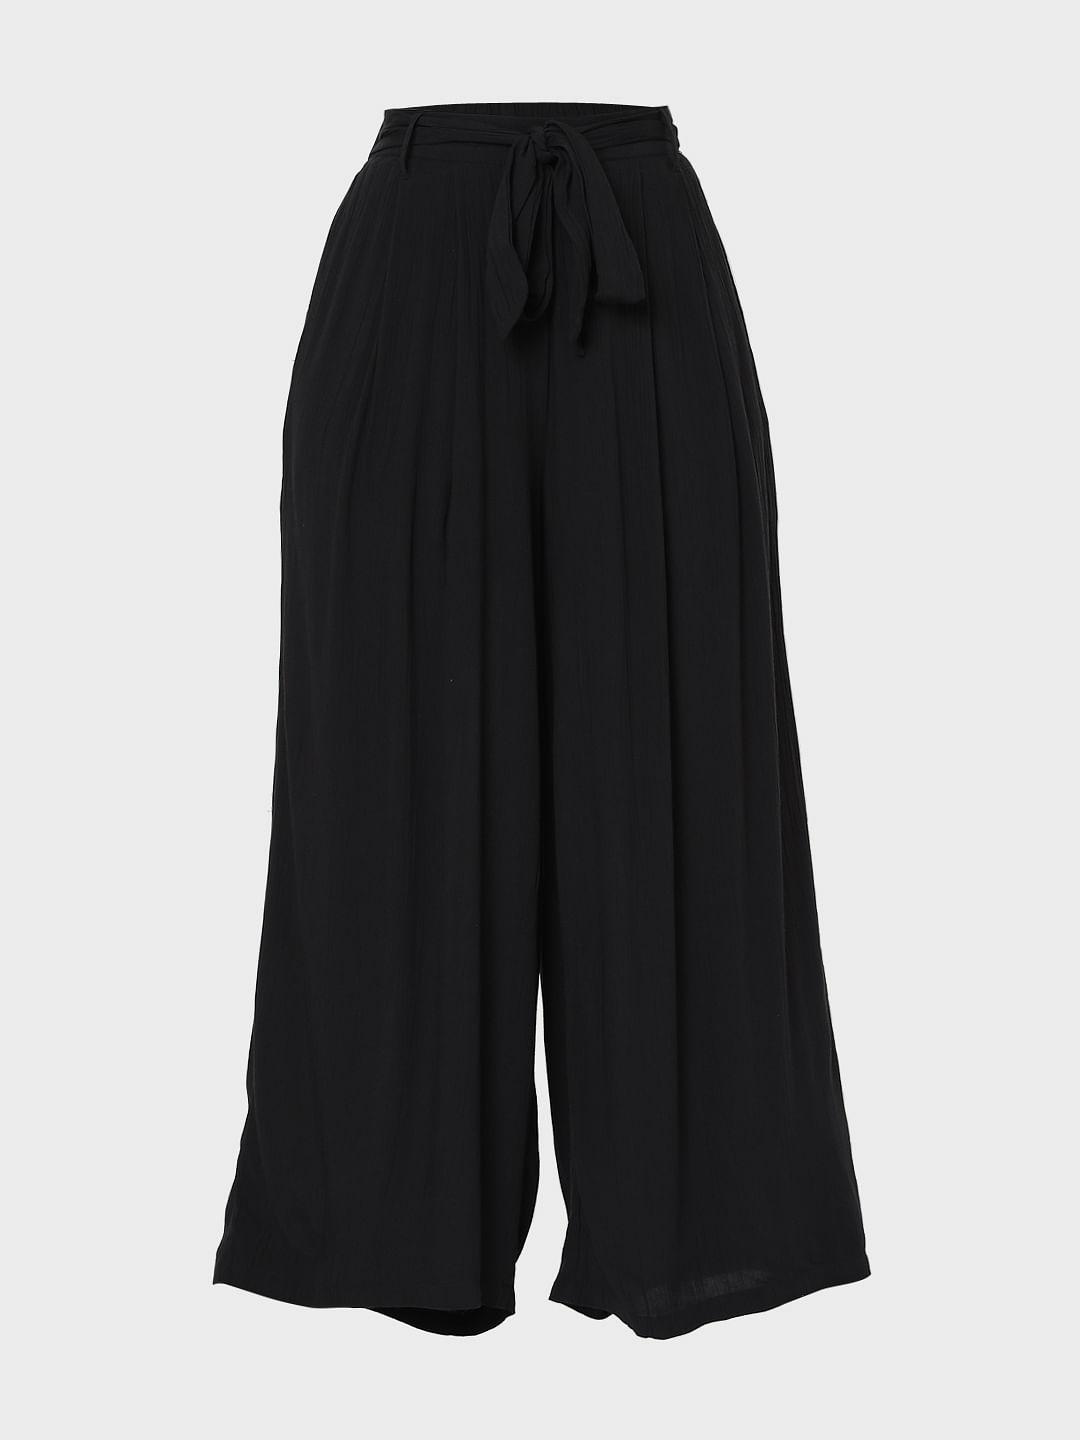 Shop HighWaisted Palazzo Pants for Women from latest collection at Forever  21  501668